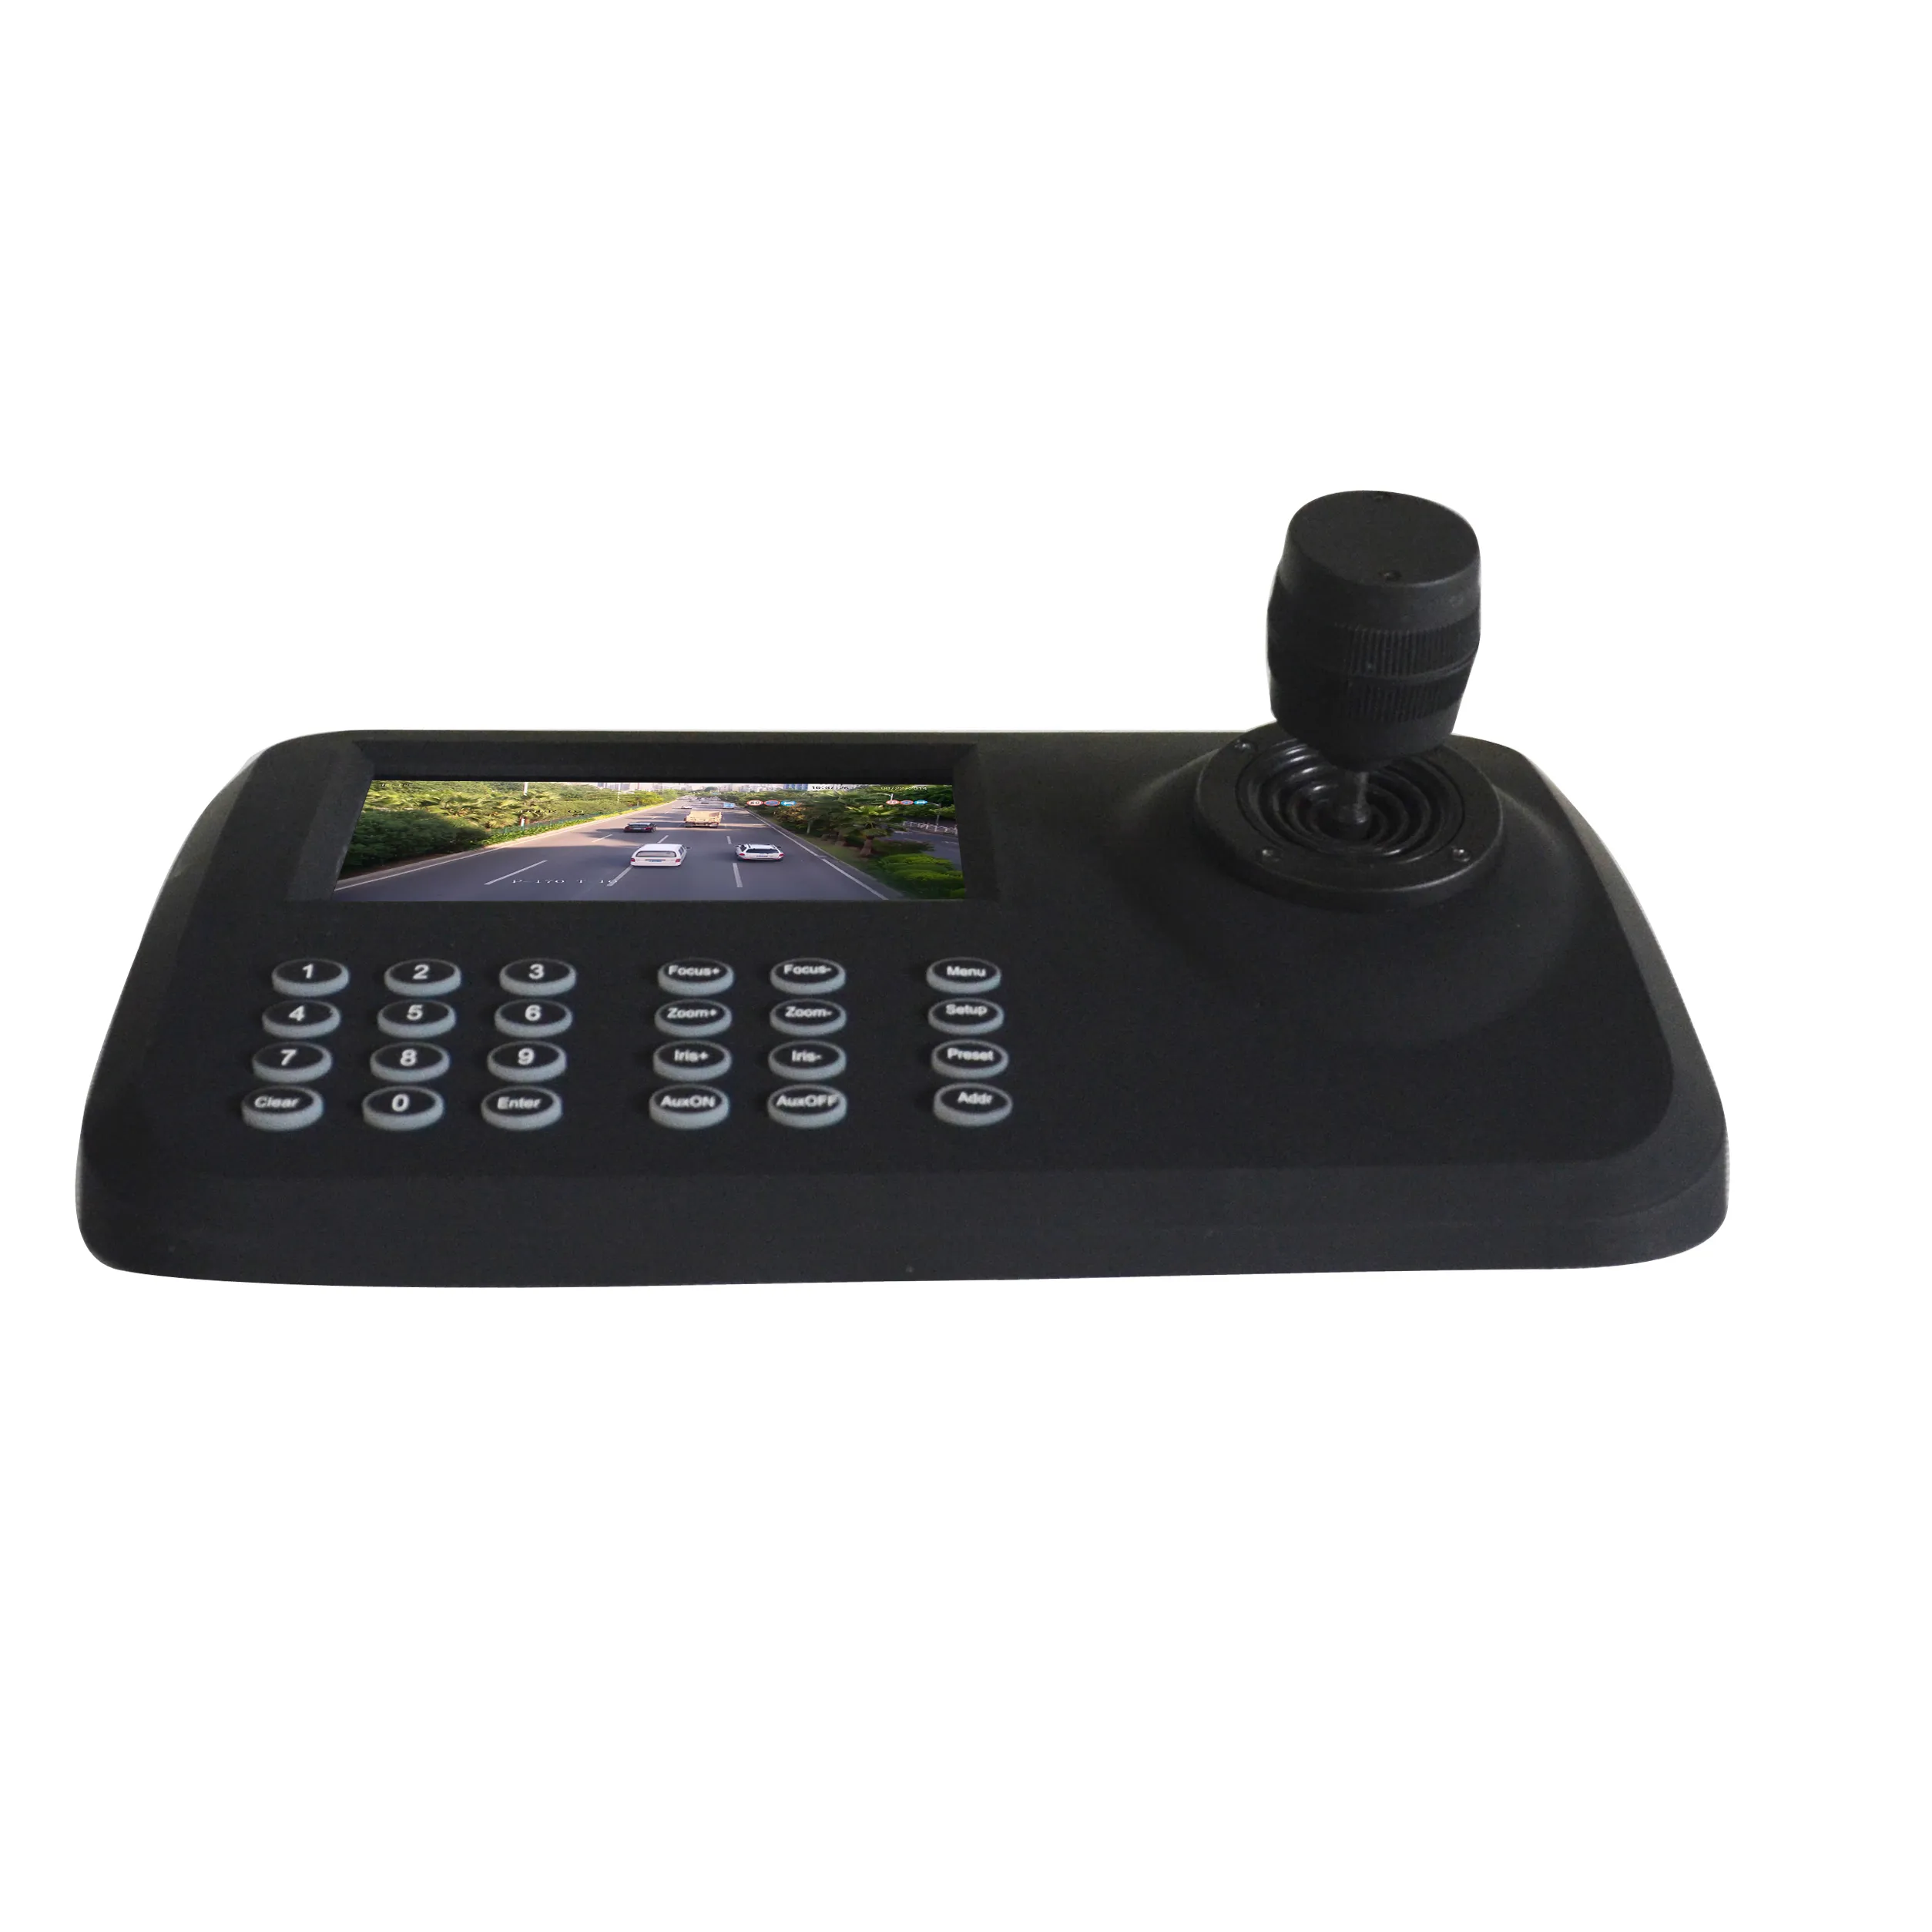 Cantonk High Quality CCTV Camera Keyboard Controller for IP PTZ Camera with 3D Joystick